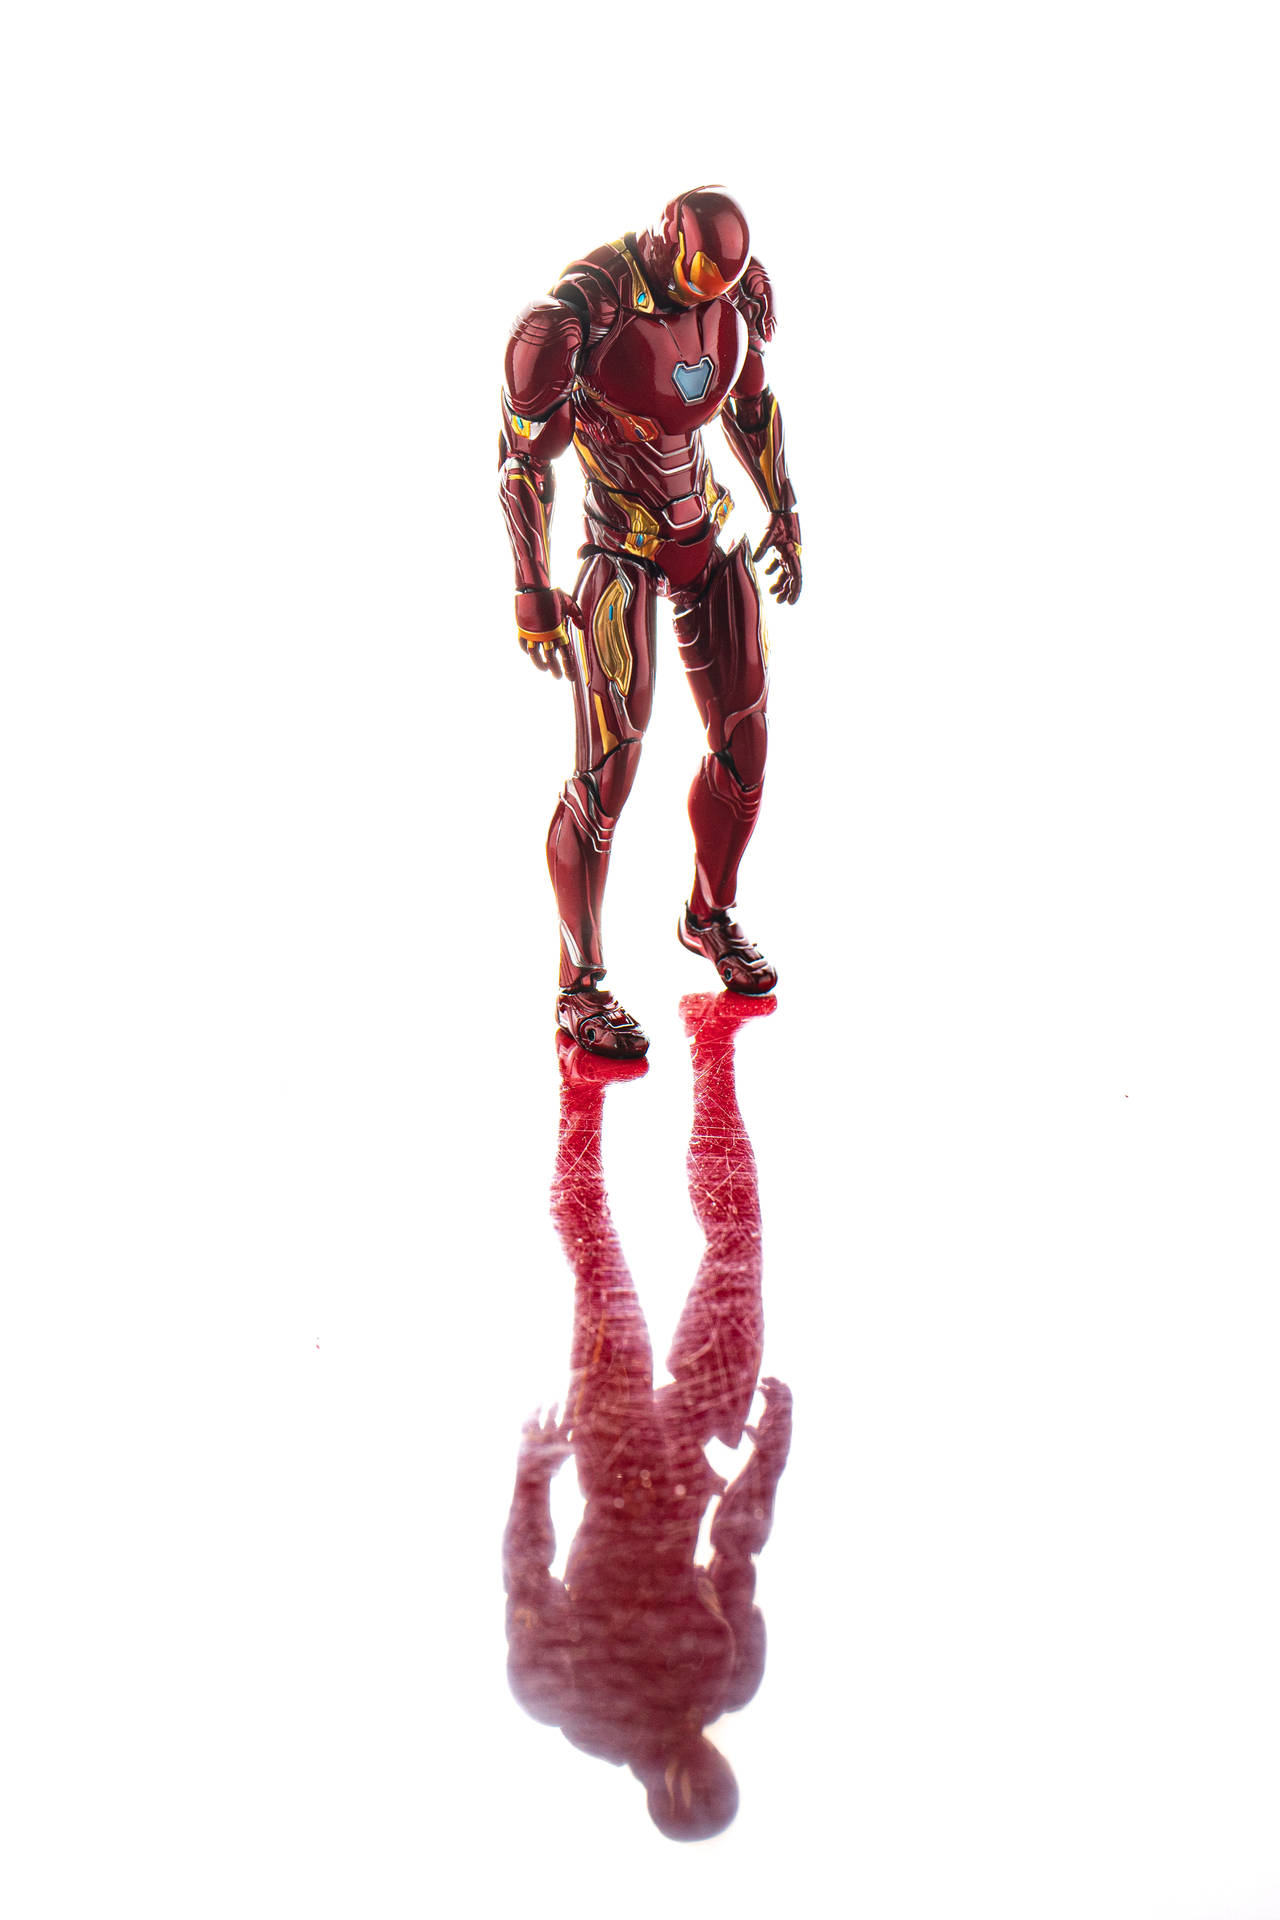 3896X5844 Iron Man Wallpaper and Background